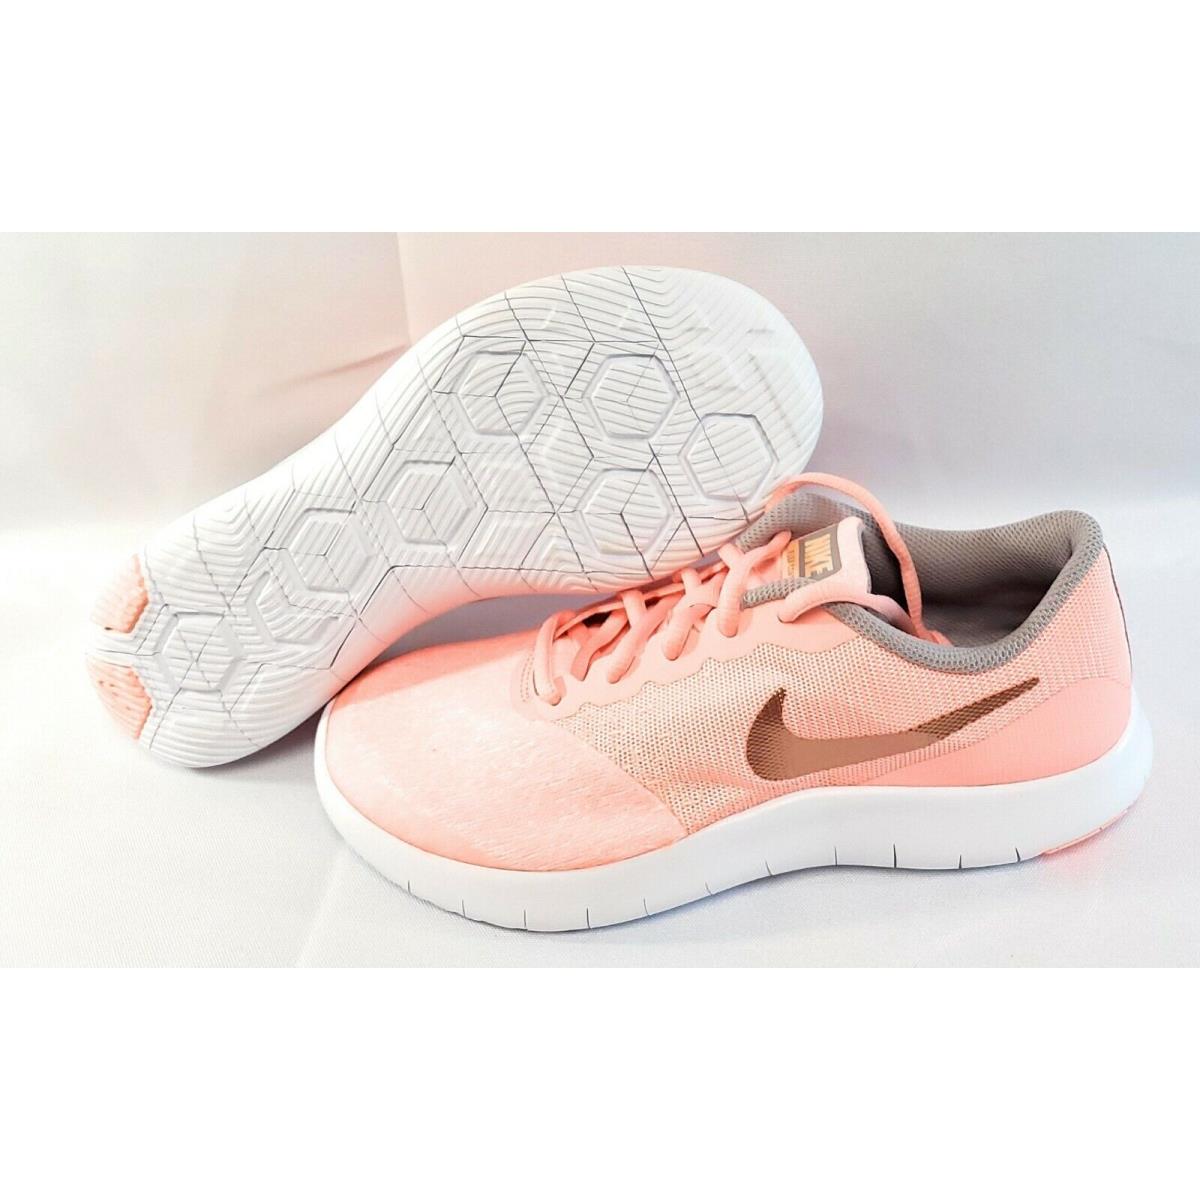 Girls Kids Youth Nike Flex Contact 917937 600 Pink Gold White Sneakers Shoes